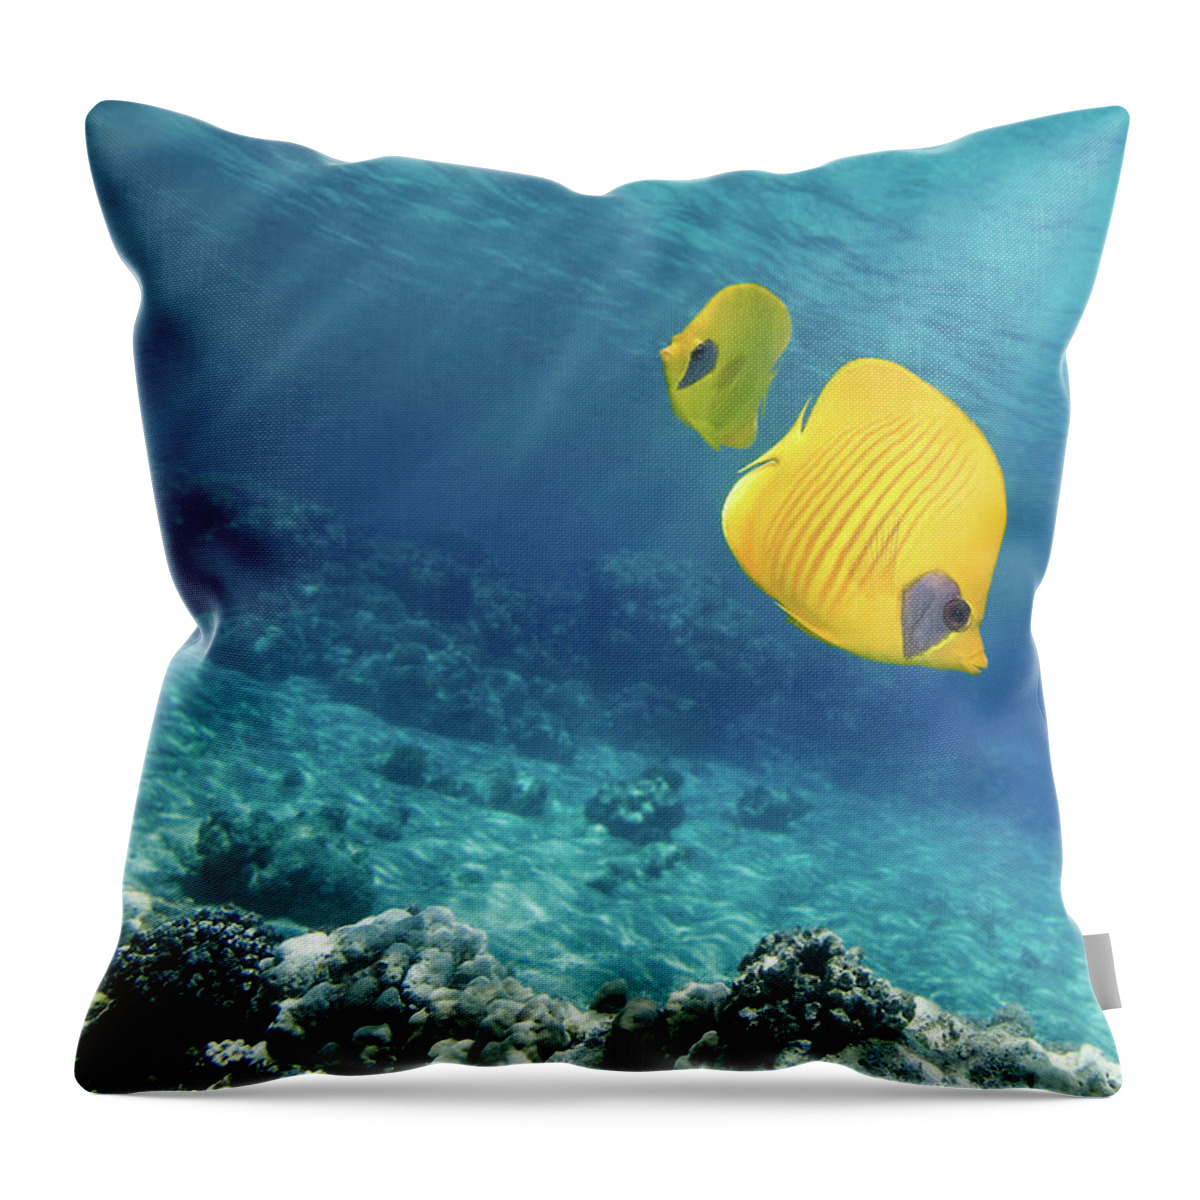 Underwater Throw Pillow featuring the photograph Underwater Picture Of Orangeface by Viridis